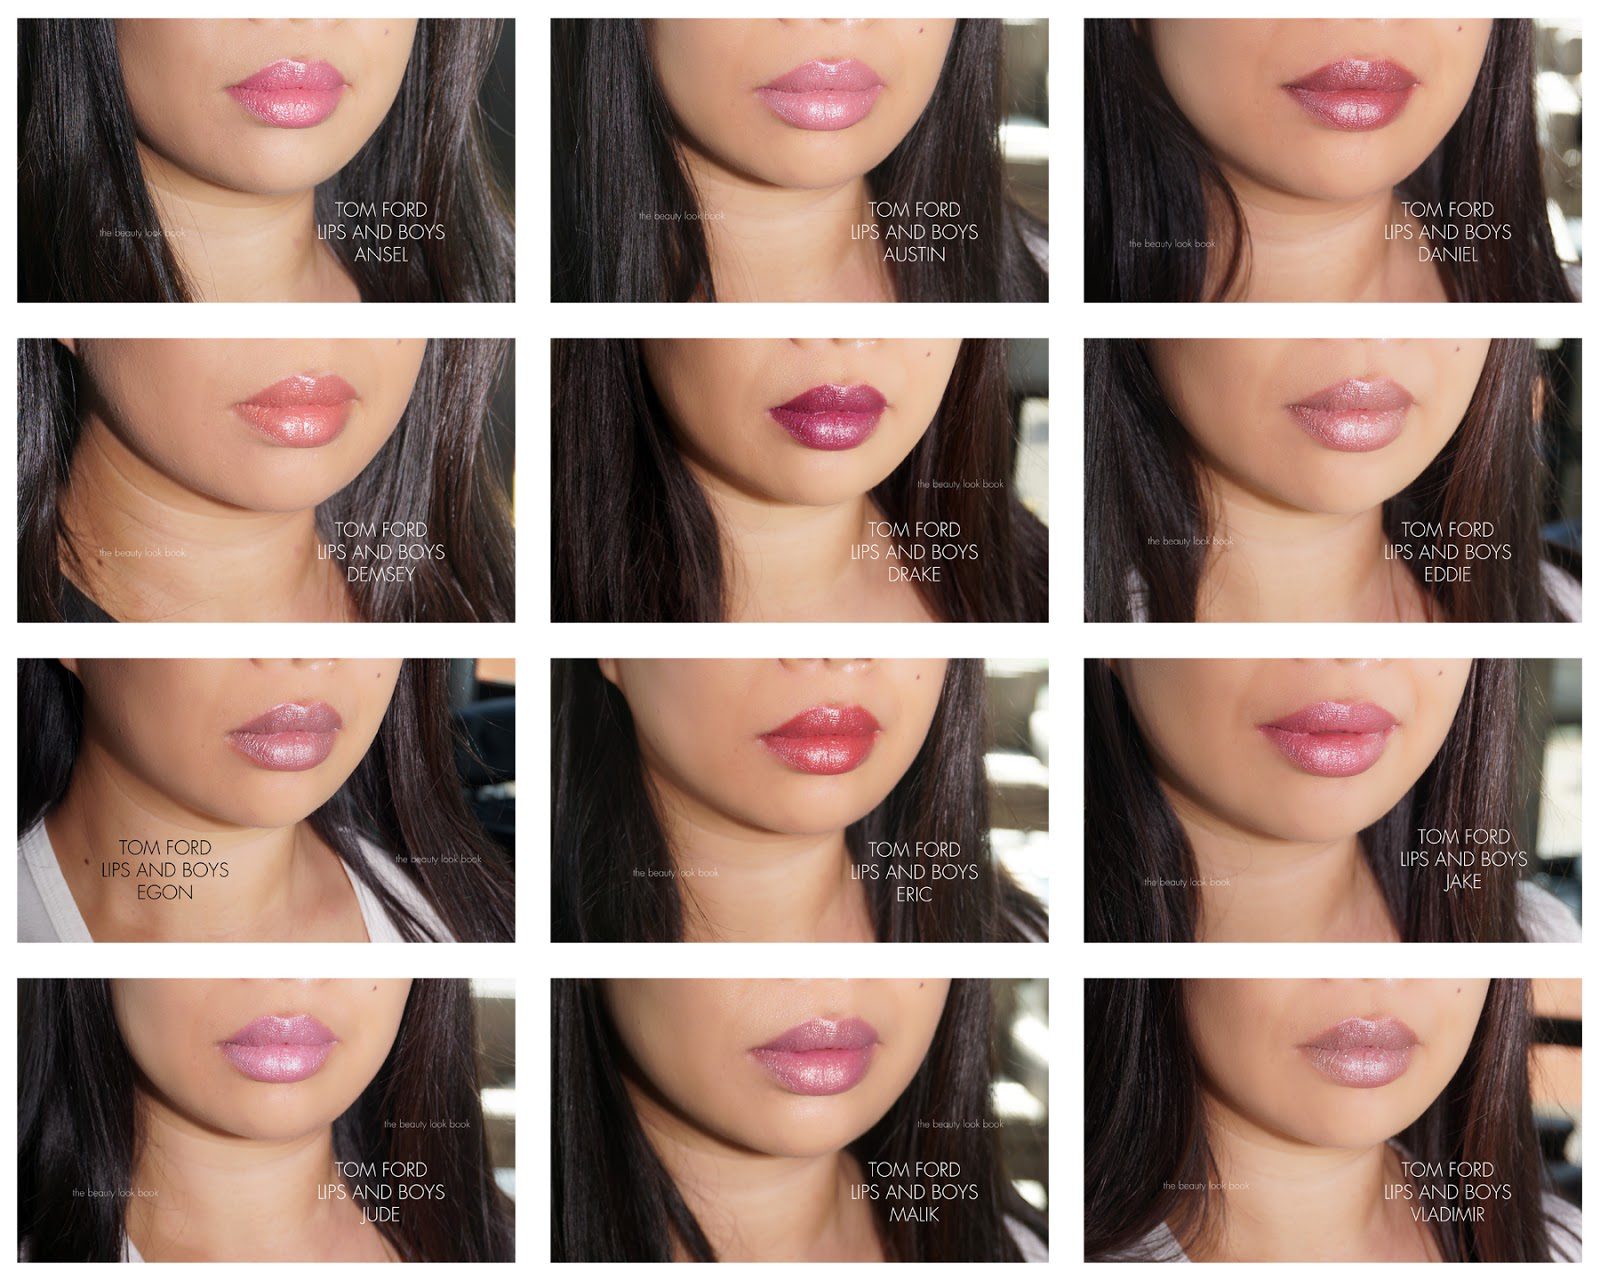 Tom Ford Lips and Boys Preview Event + Beauty Look Book Picks - The Beauty  Look Book